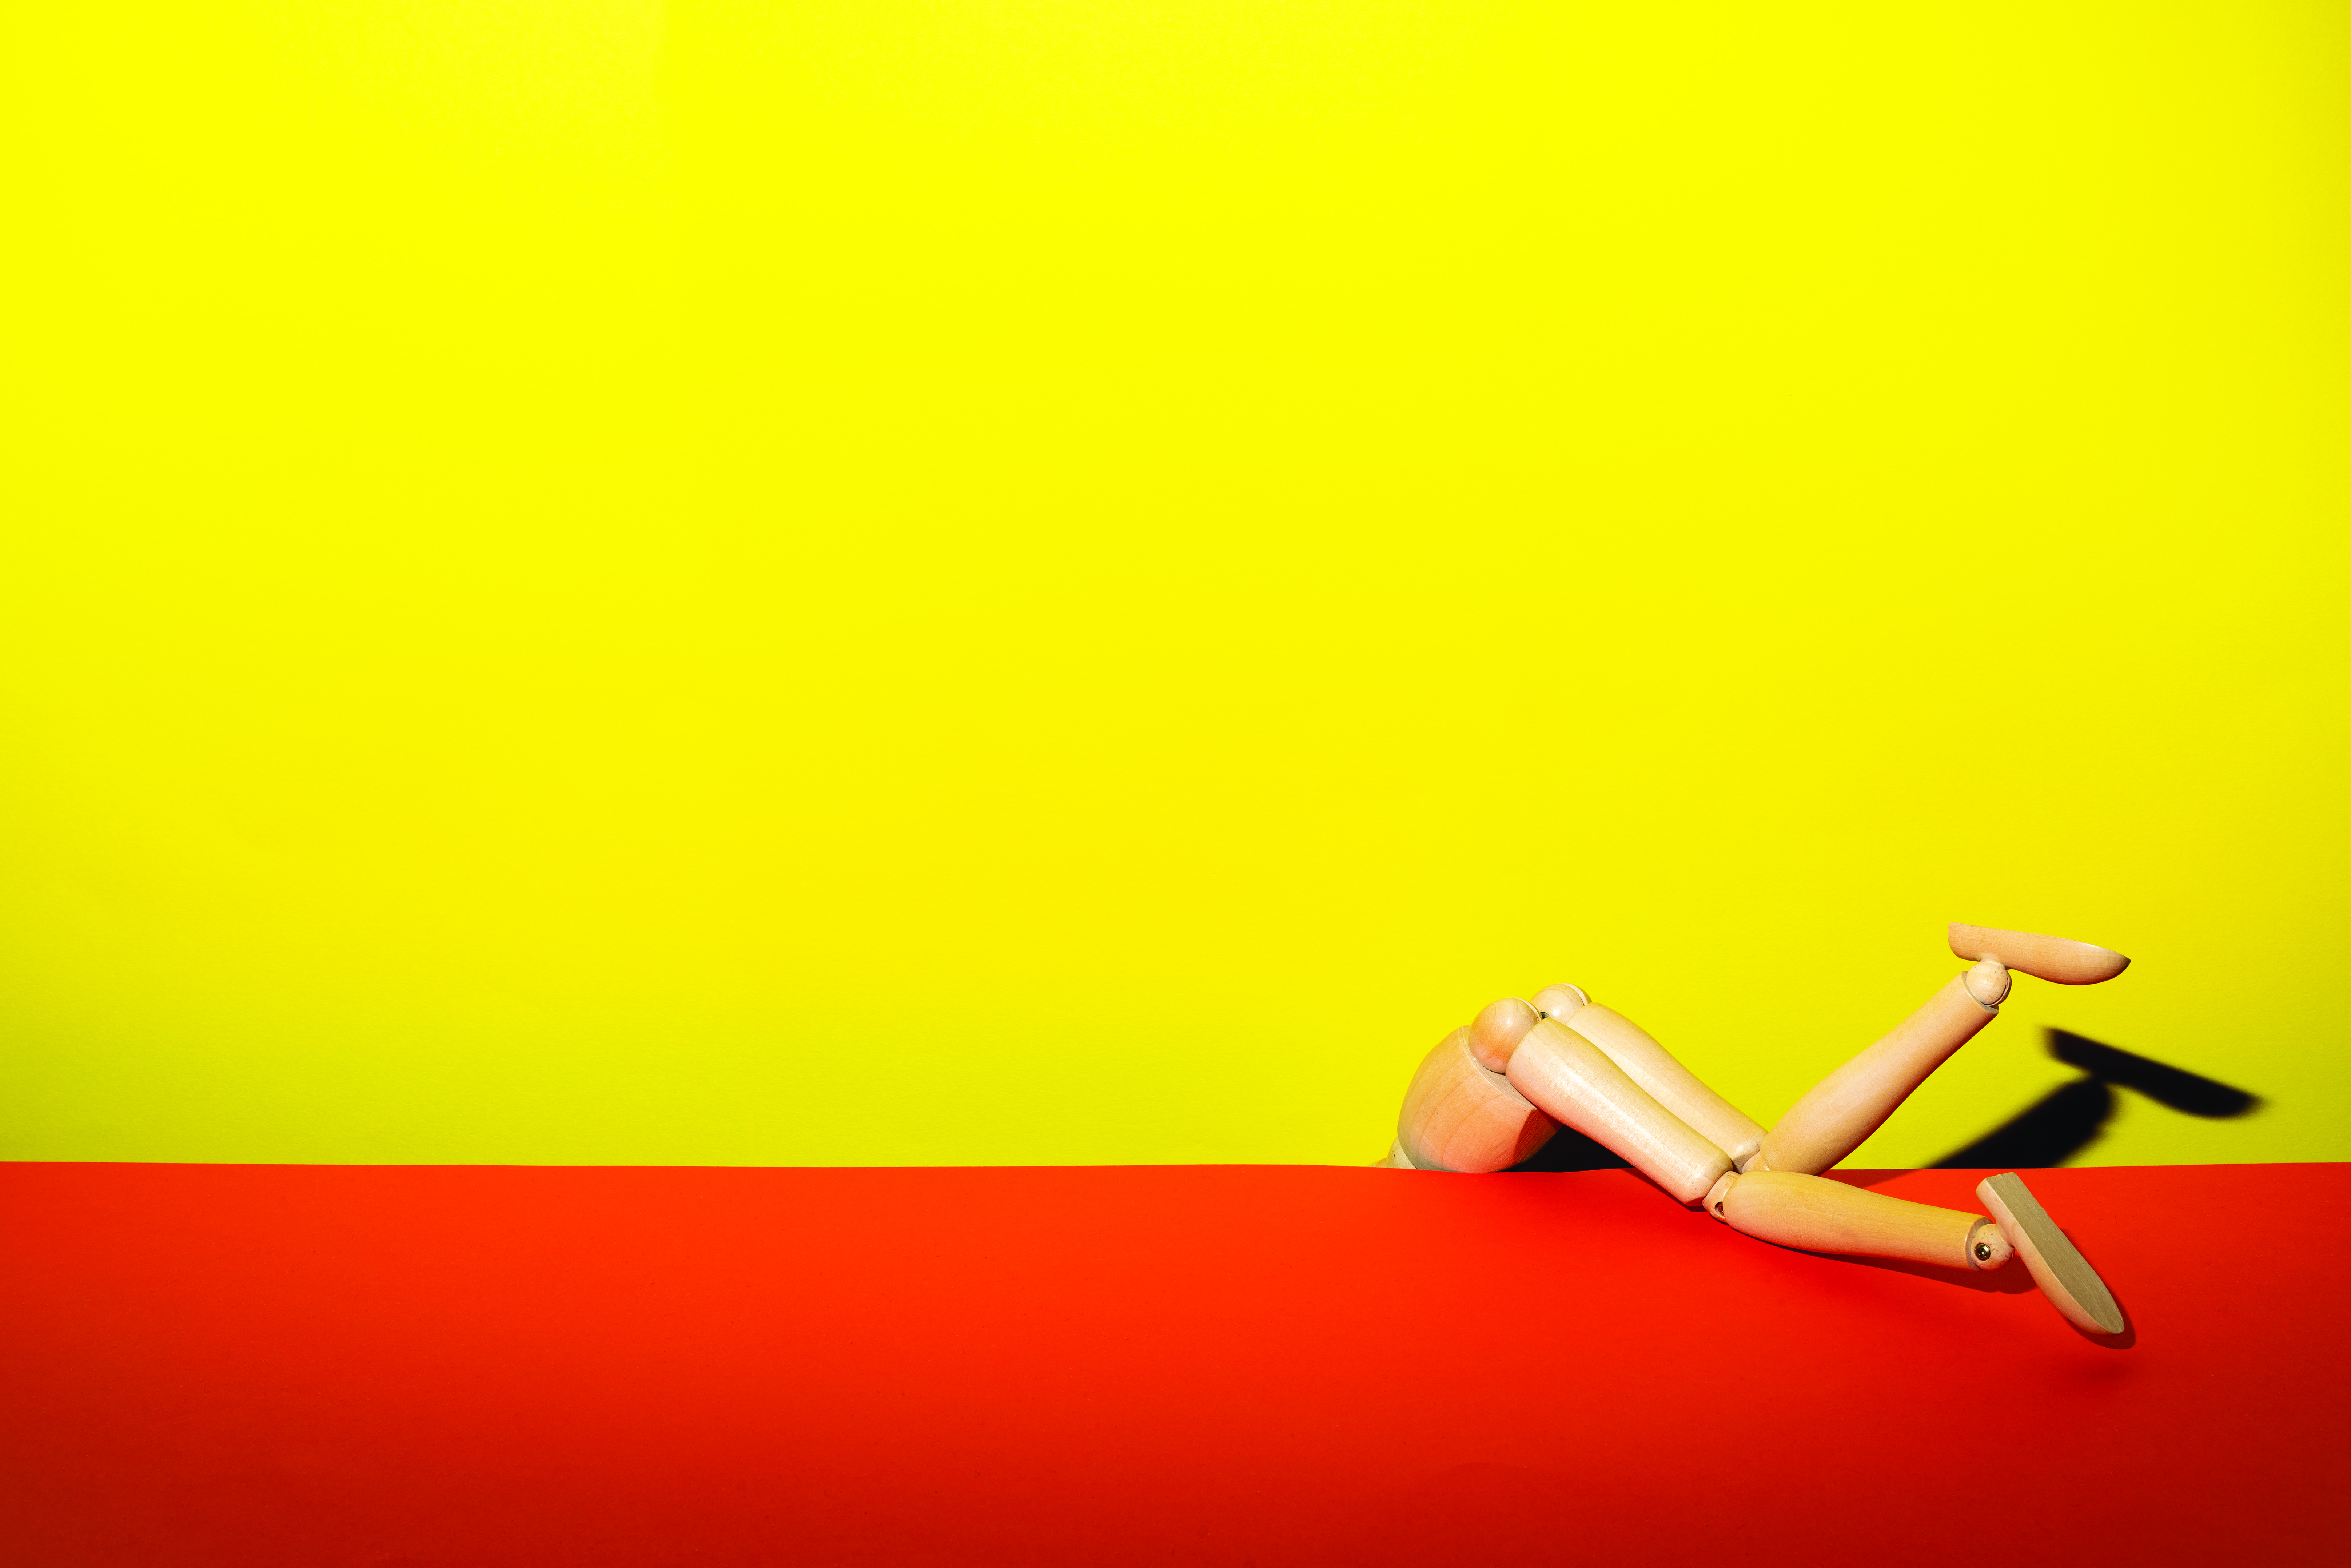 A wooden artist's model in the shape of a person, legs emerging from between a yellow wall and red floor, reenacting an image by Guy Bourdin